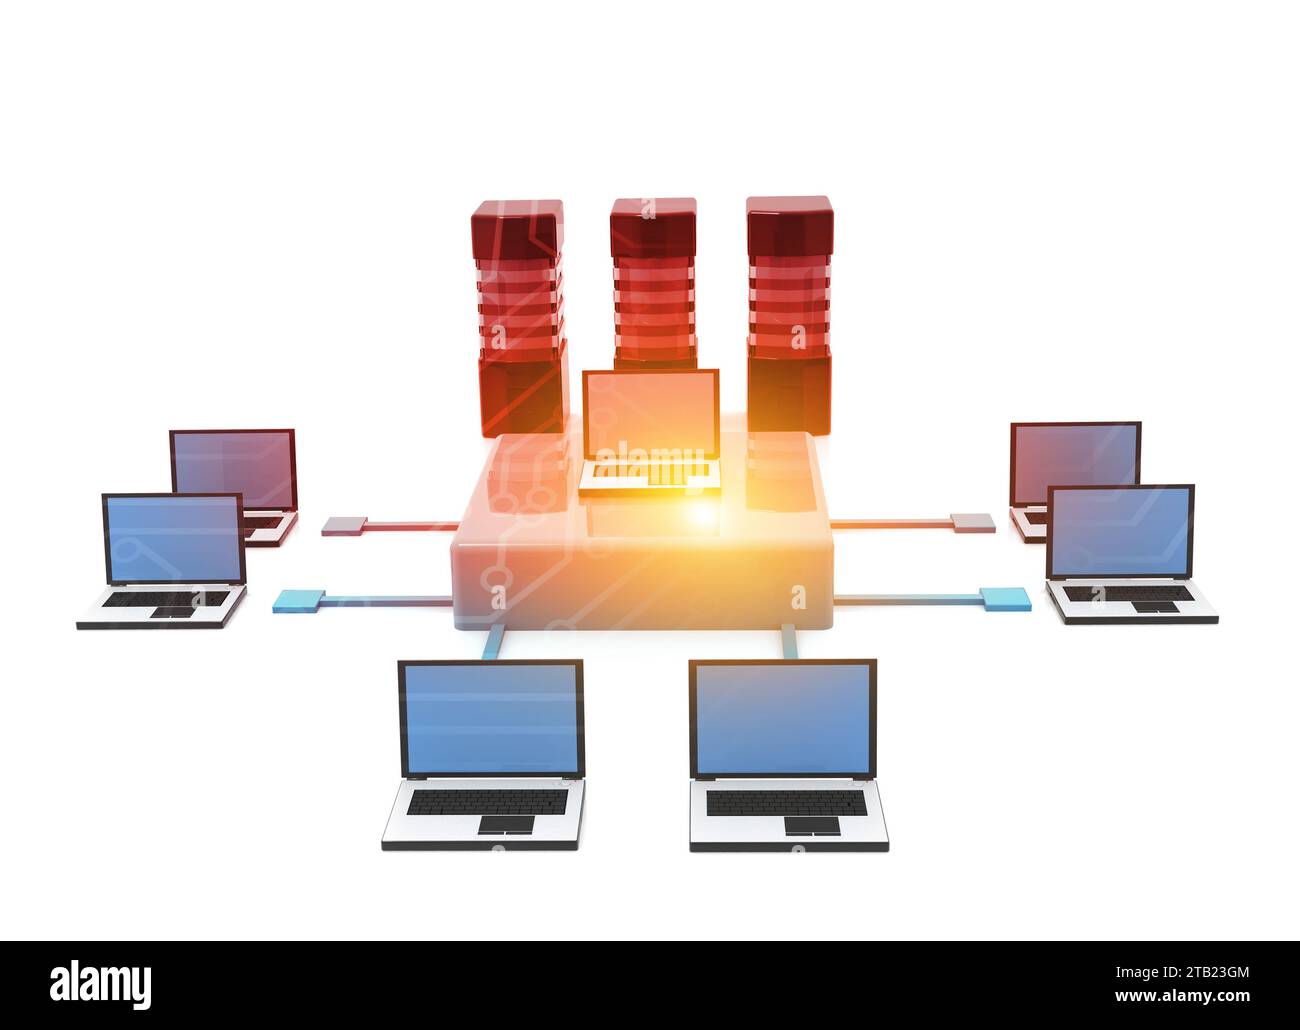 Computer networking. Servers with laptop.  3d illustration Stock Photo